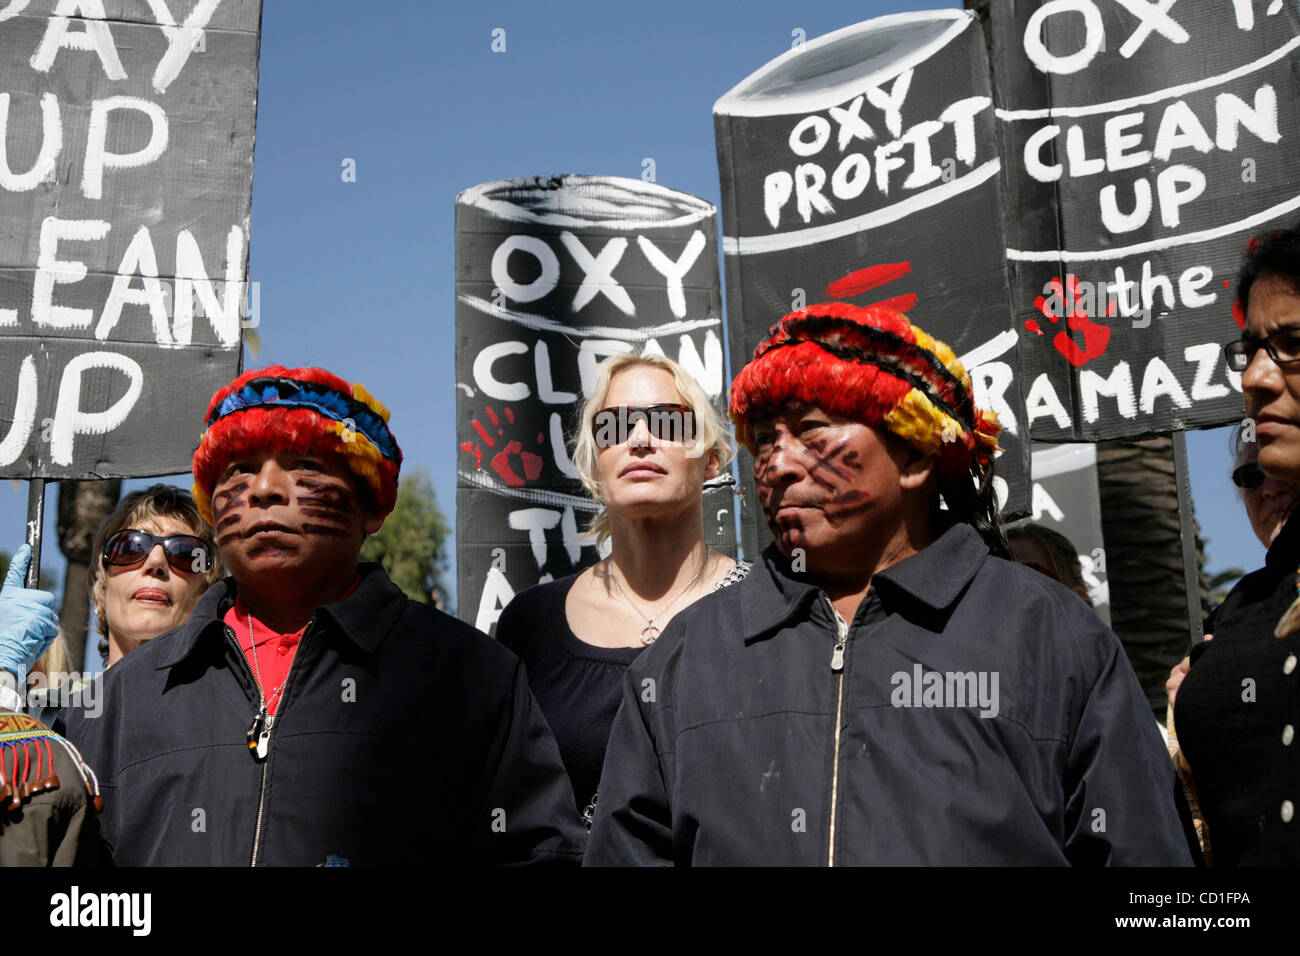 May 02, 2008 - Santa Monica, California, United States - Protesters and Achuar people from the Peruvian Amazon  gathered outside of the site of Occidental Petroeum Company's Annual meeting in Santa Monica, Calif. At issue are nine billion barrels of toxic wastewater left on the lands of the Anchuar  Stock Photo